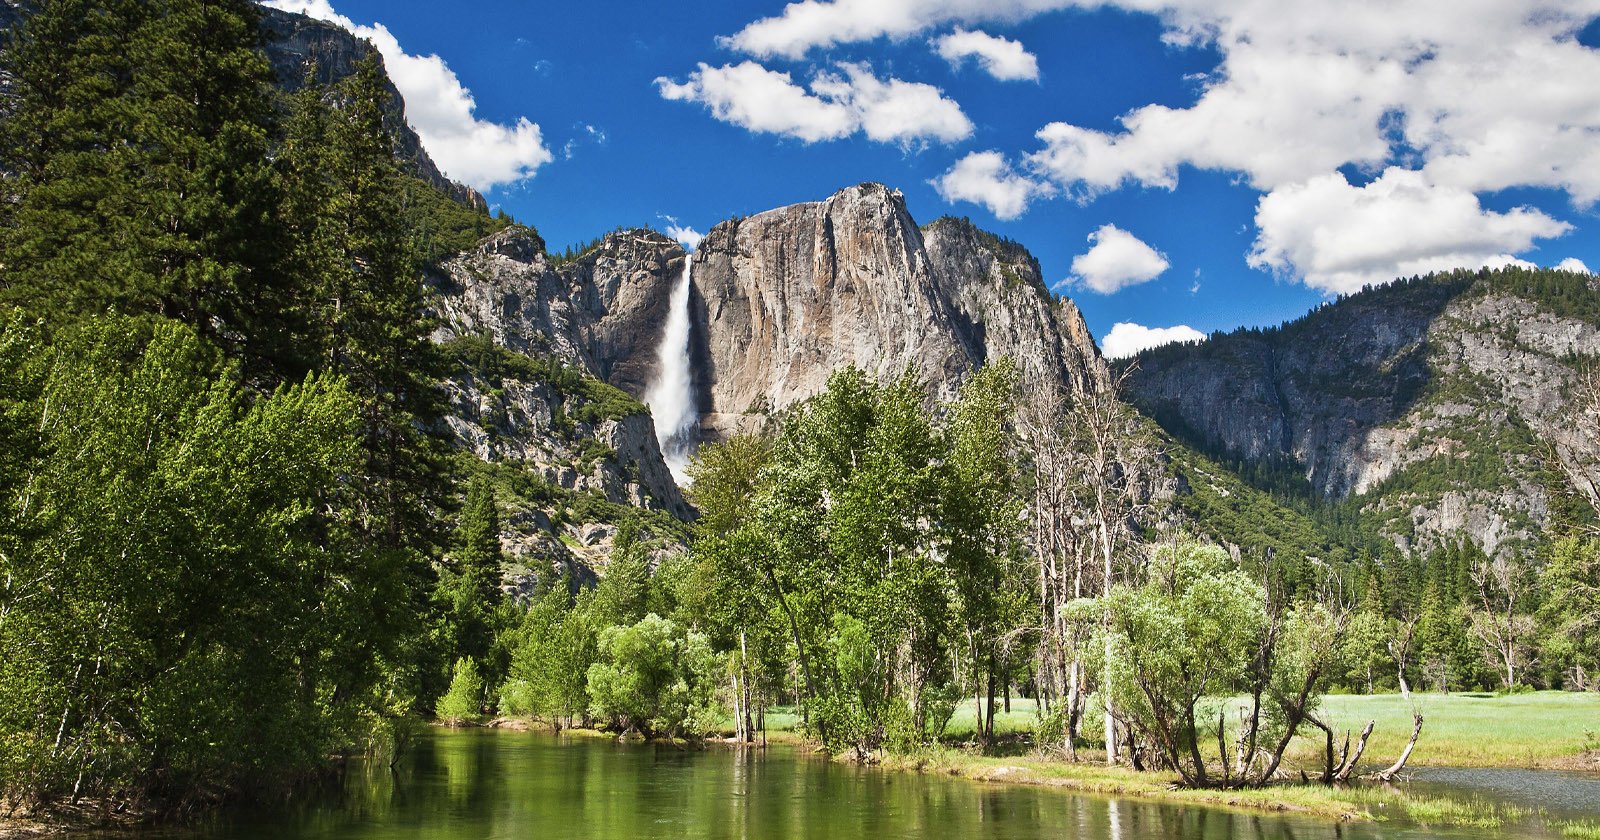 Ruling Overturned: You May Again Need a Permit to Film in National Parks